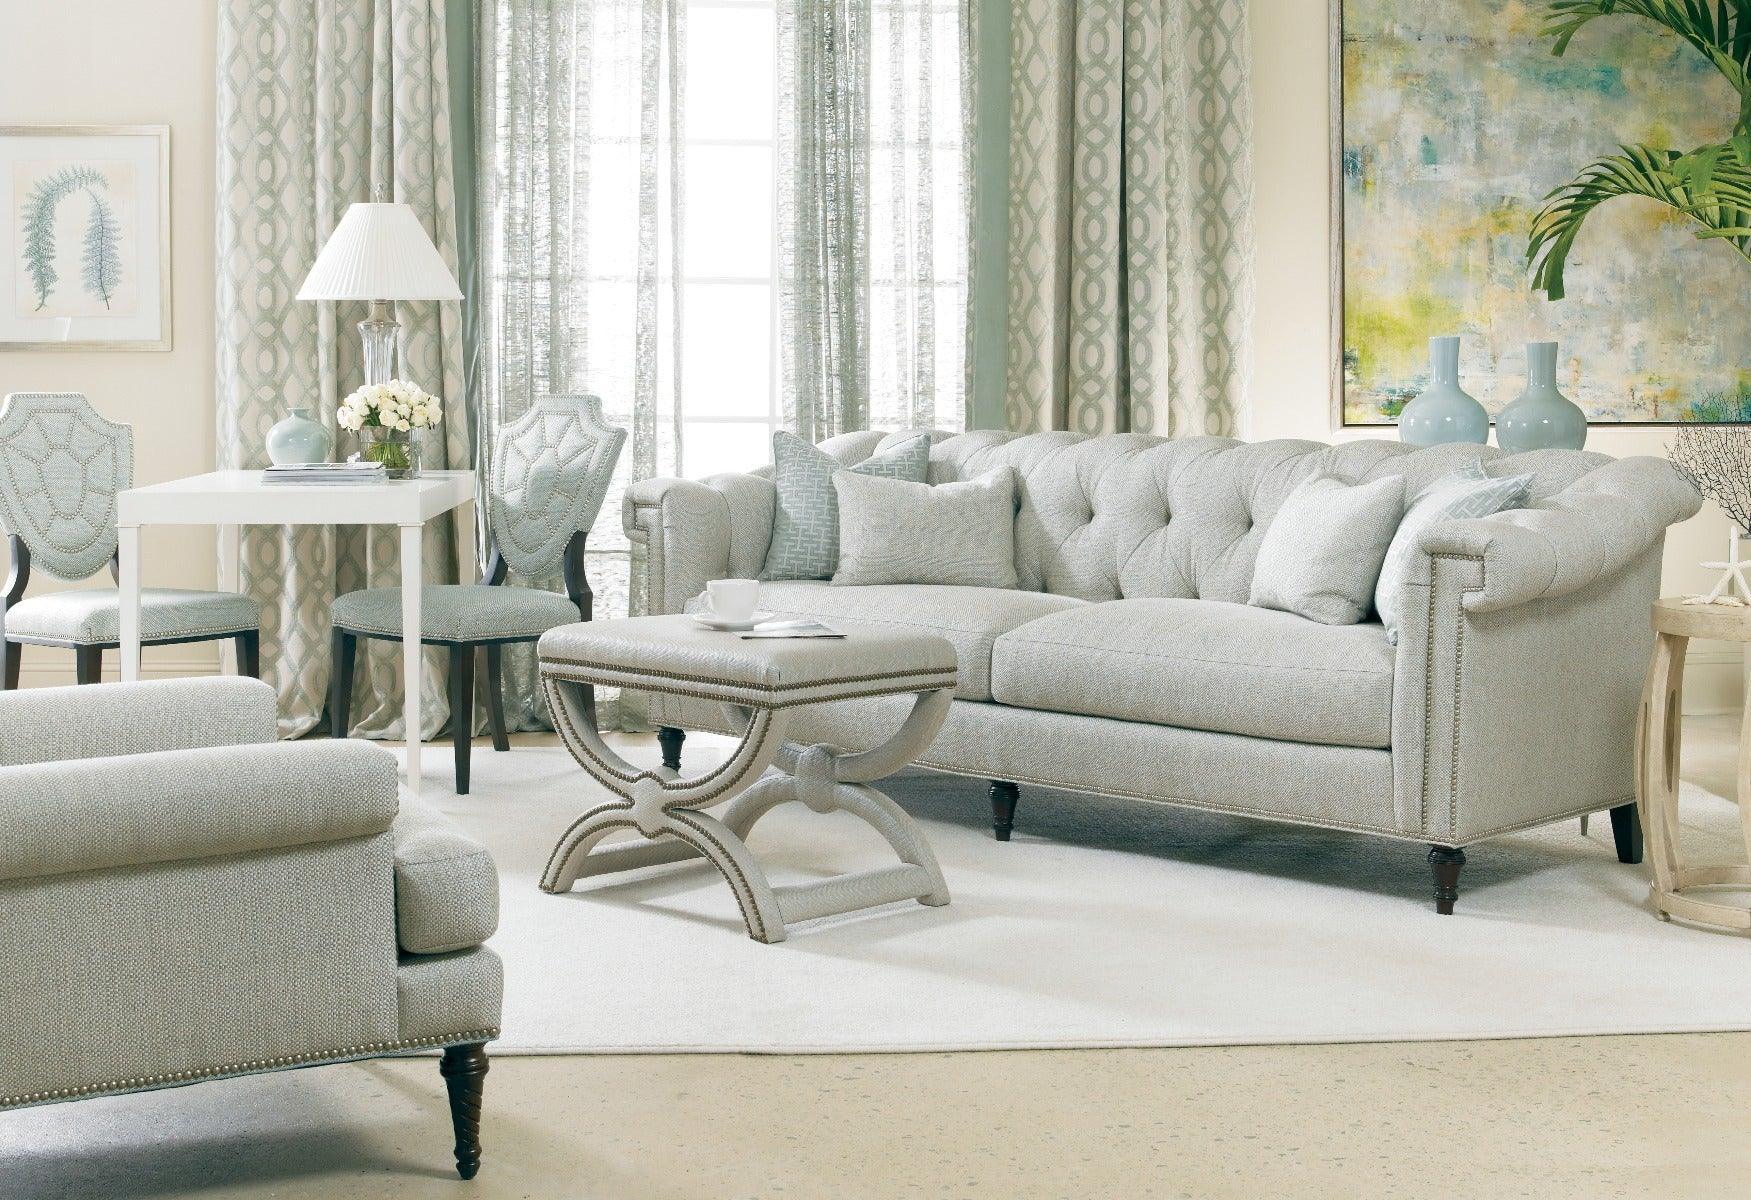 https://www.wellappointedhouse.com/cdn/shop/files/hand-tufted-back-and-arms-upholstered-two-seat-cushion-sofa-with-nailhead-detail-sofas-and-settees-the-well-appointed-house-2_8aba514e-a8db-43c4-8f55-d6ab7a5fefe5.jpg?v=1691670956